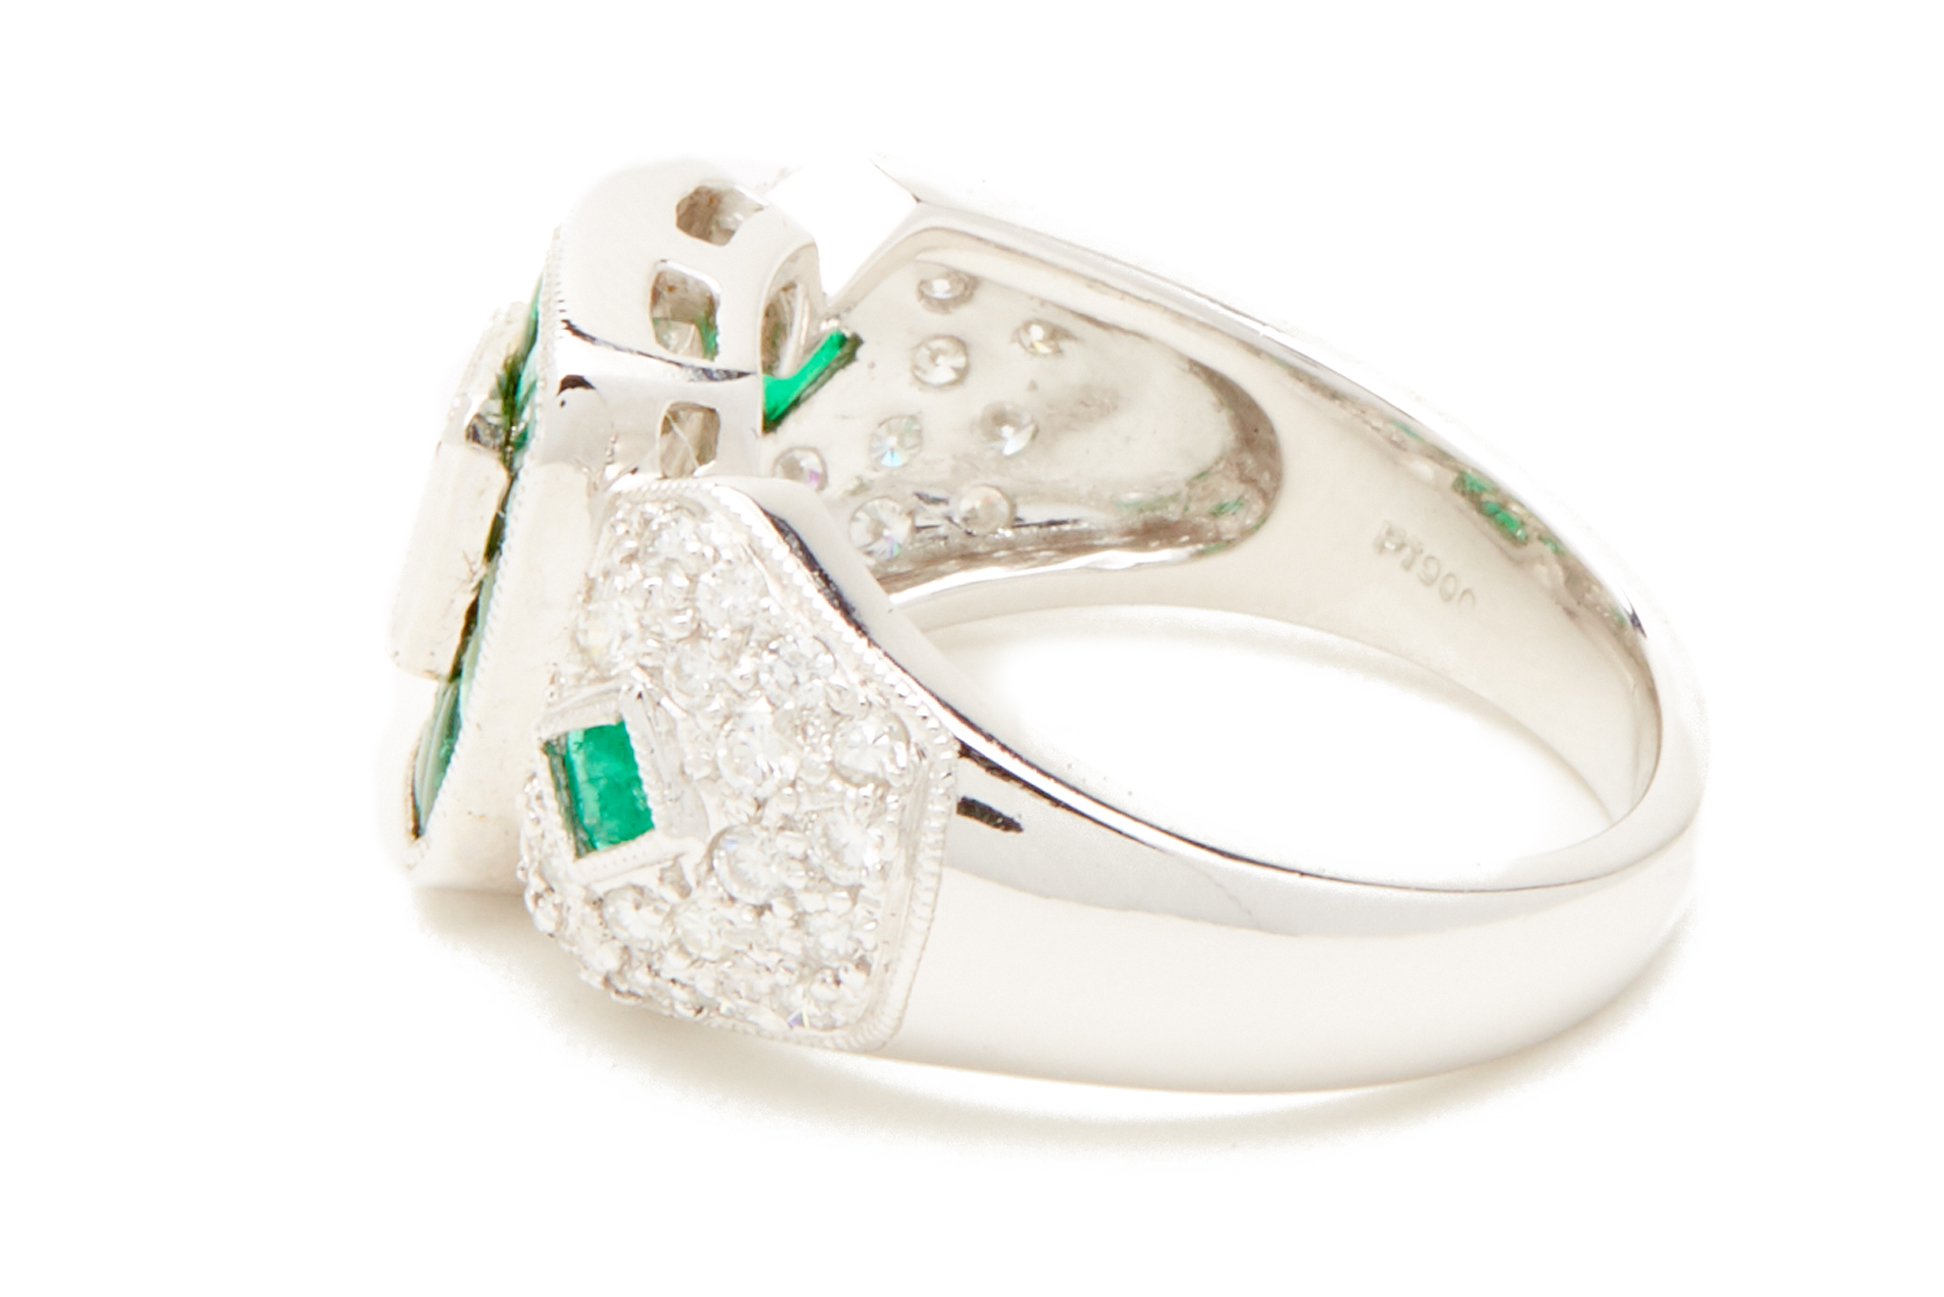 A PLATINUM, EMERALD CUT DIAMOND AND EMERALD RING - Image 3 of 4